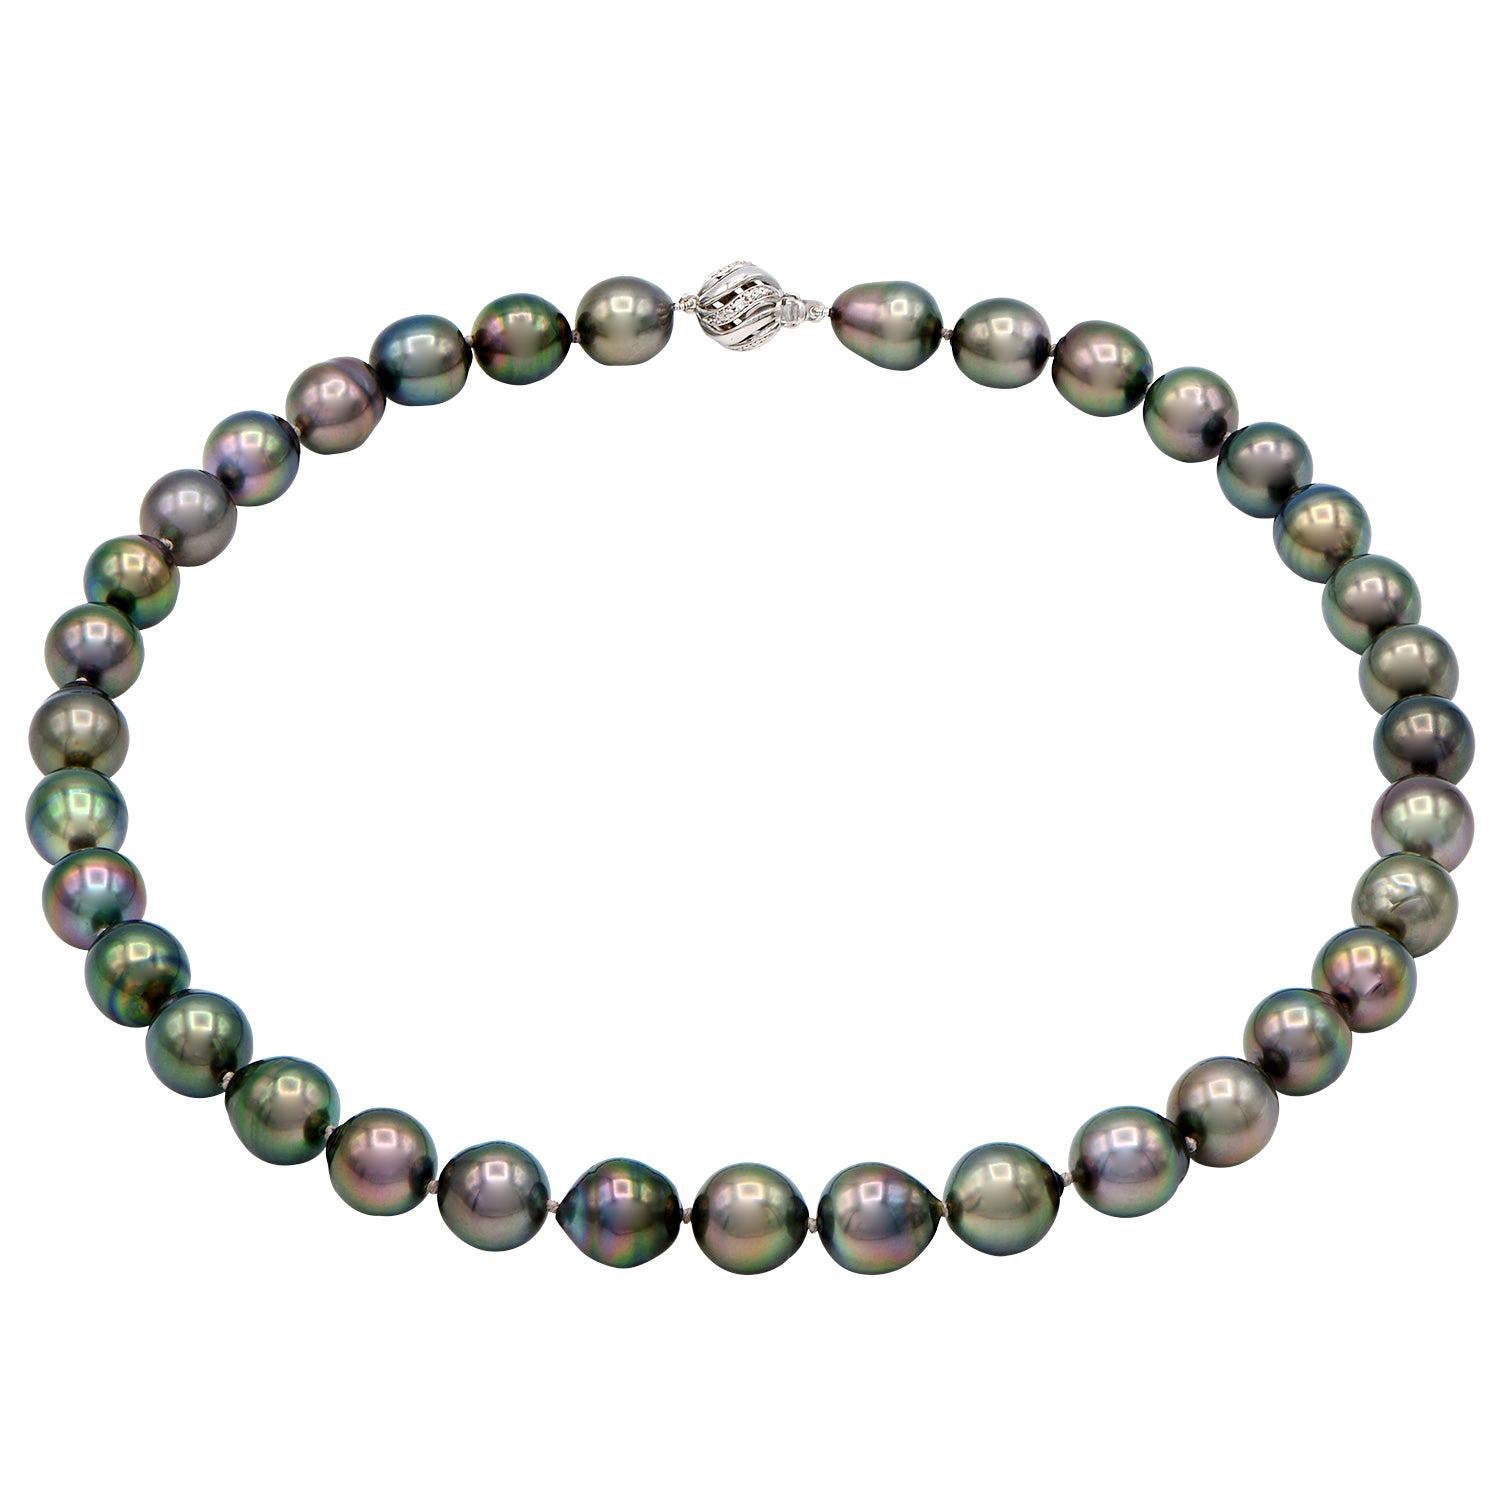 Baroque Tahitian Pearl Necklace with 14 Karat White Gold Clasp